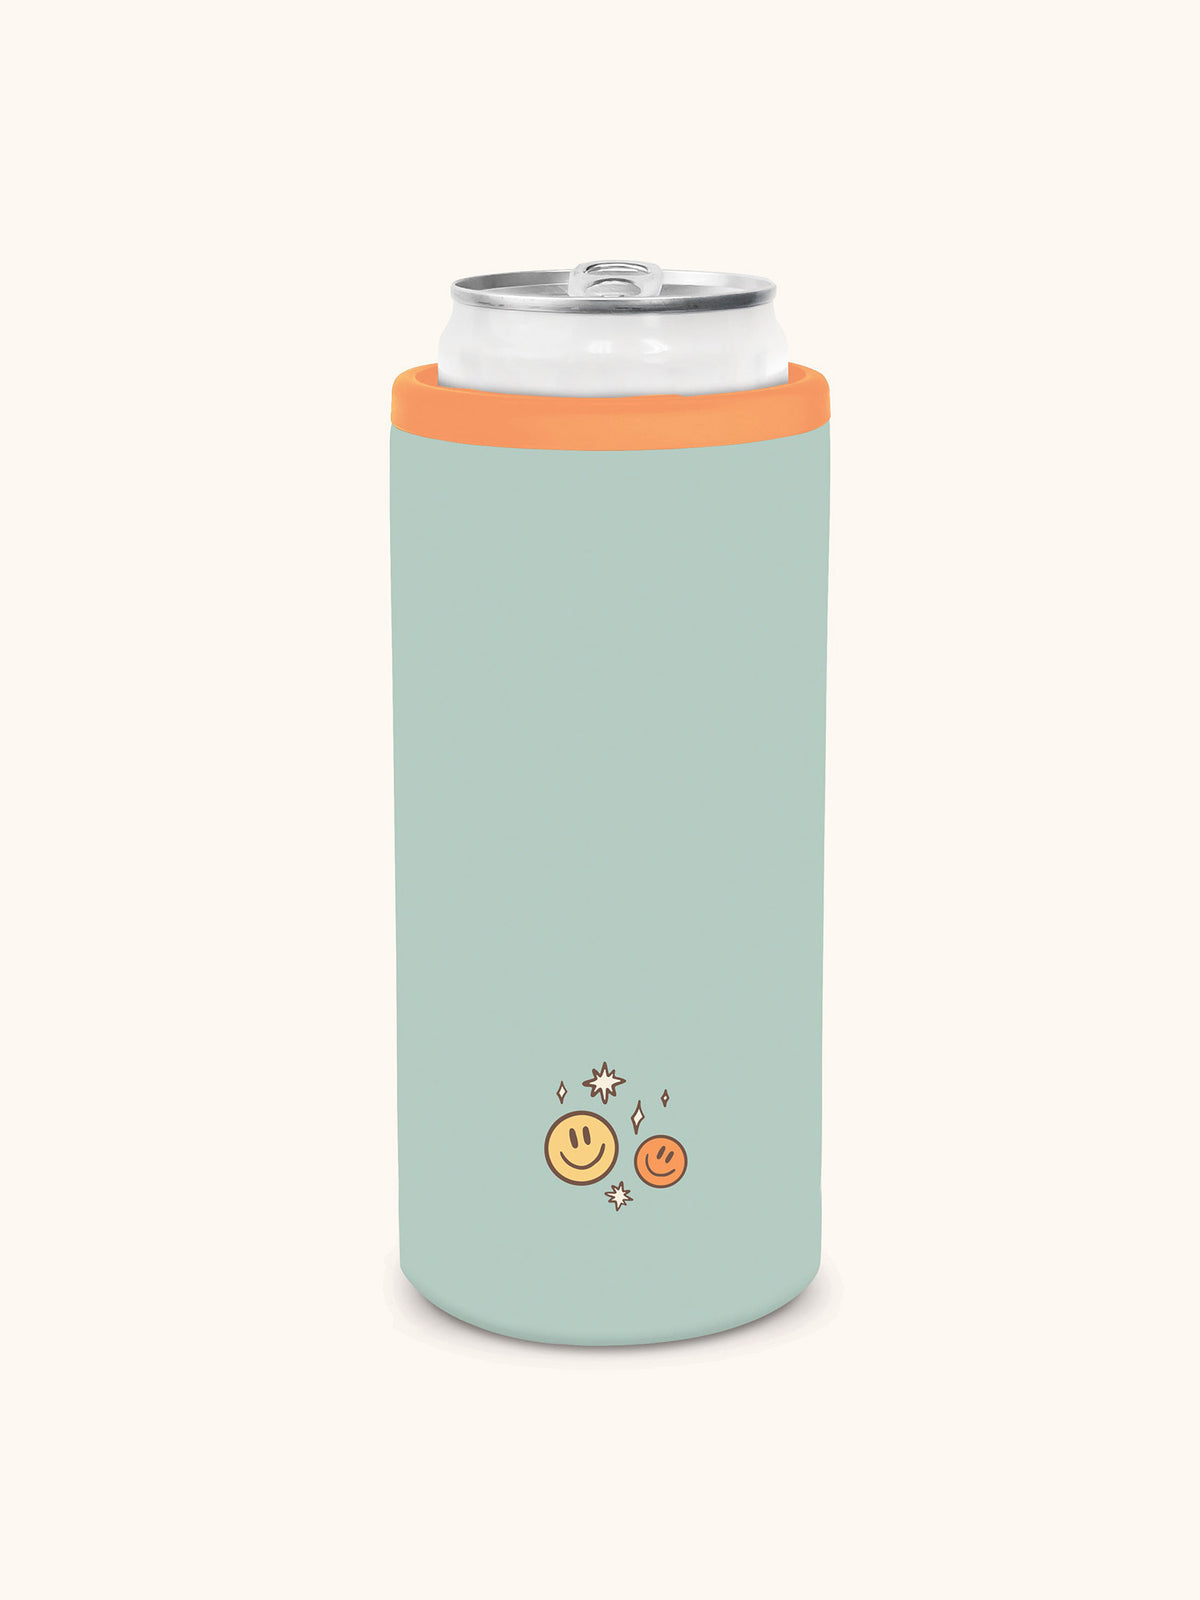 12 oz. Slim Ultimate Can Cooler – The Mixologer